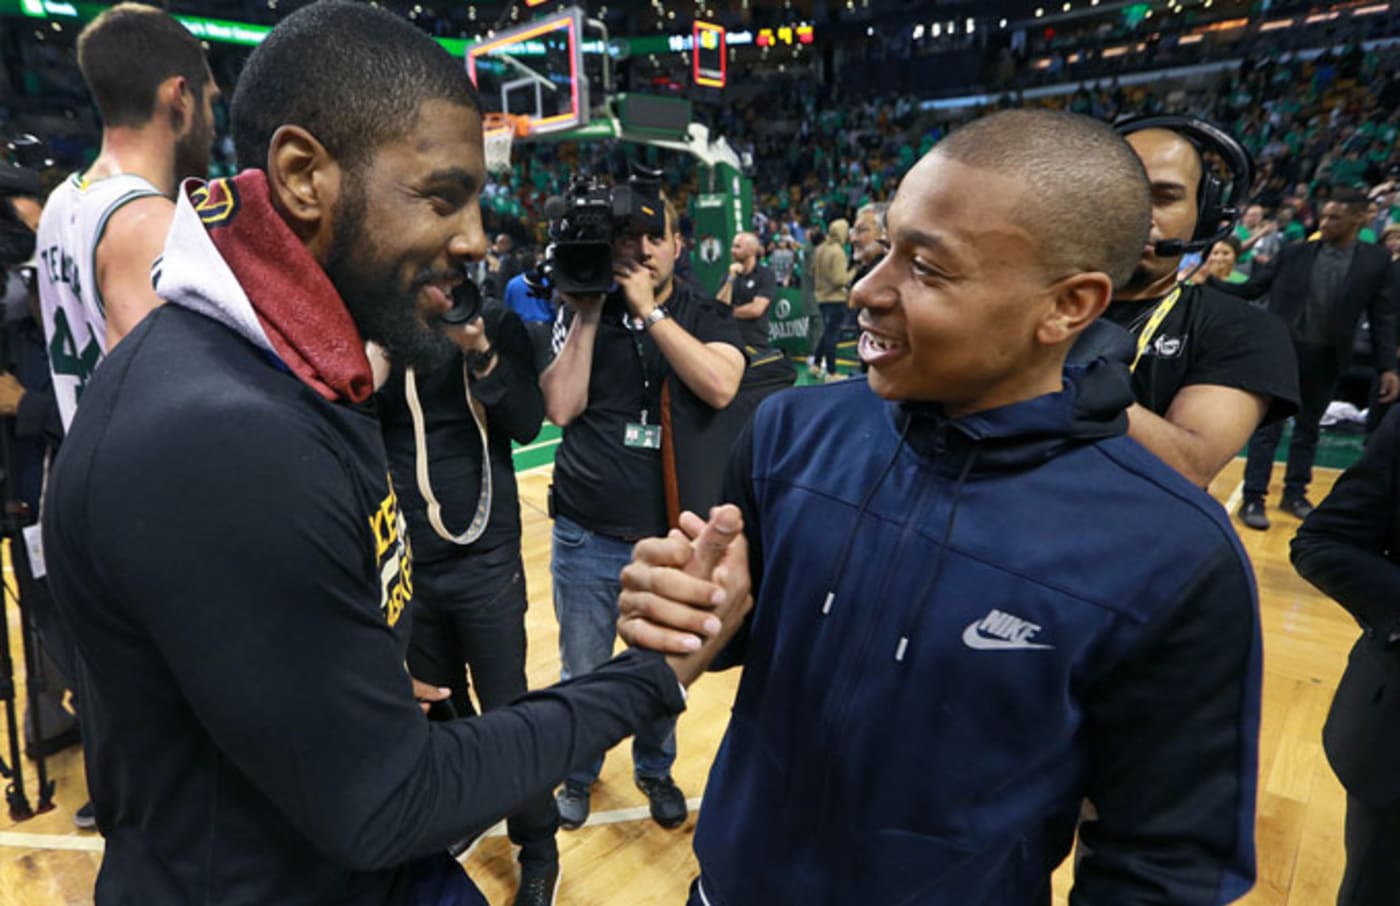 Kyrie Irving and Isaiah Thomas exchange a handshake.